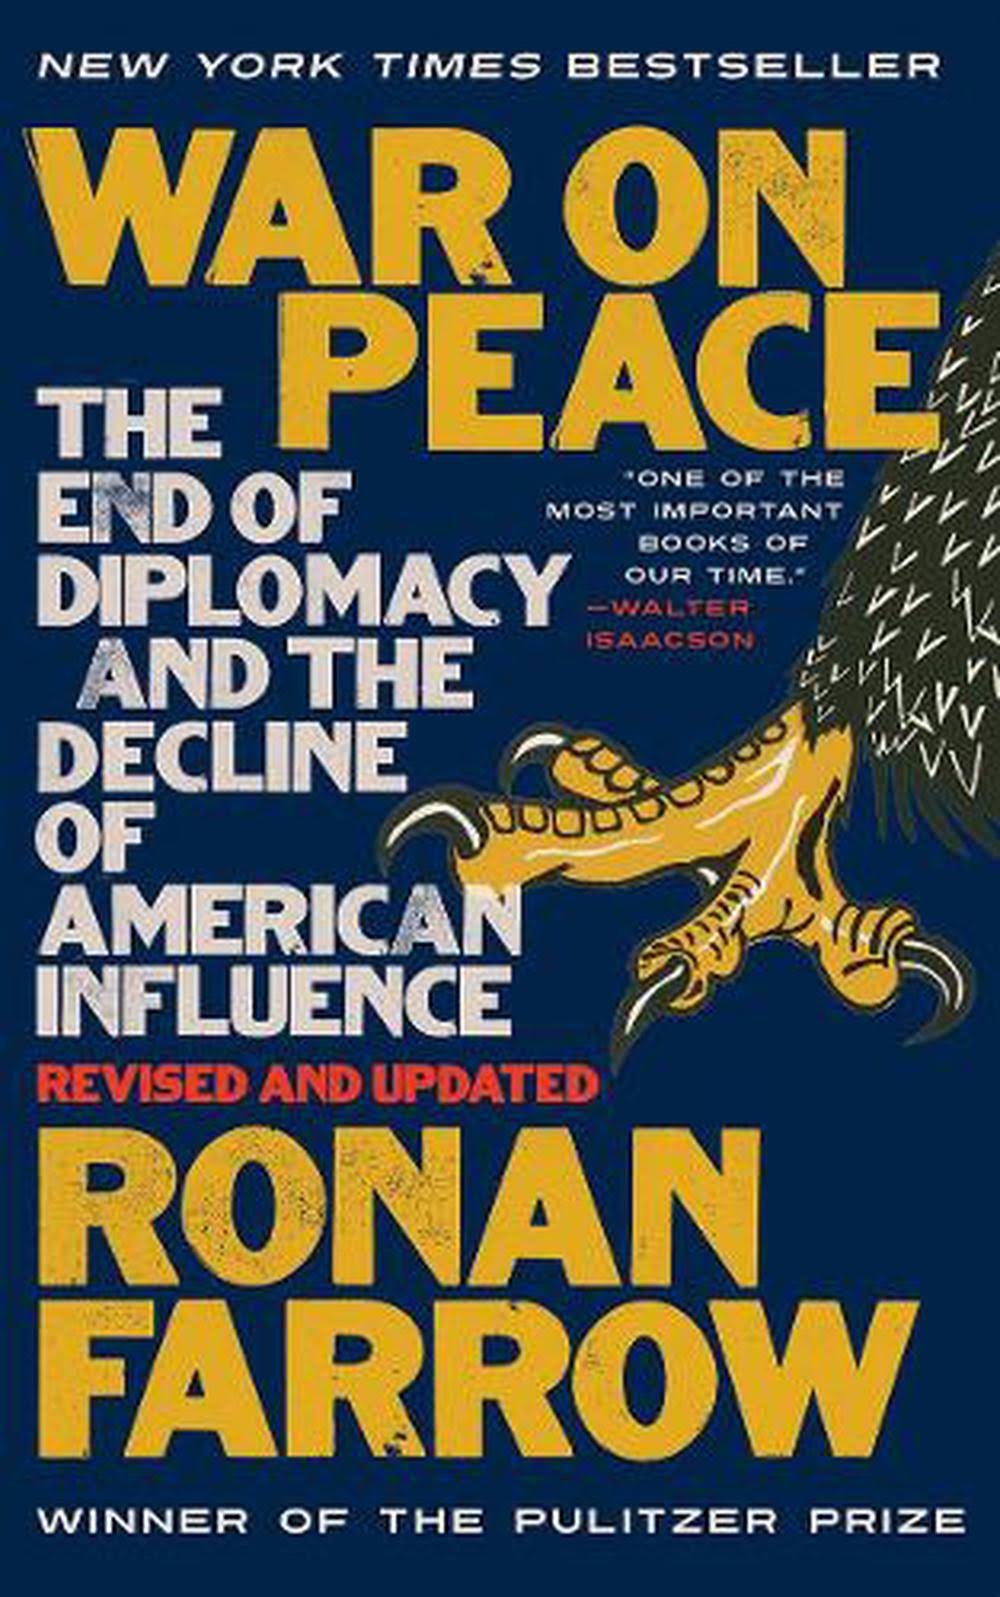 War on Peace: The End of Diplomacy and the Decline of American Influence [Book]